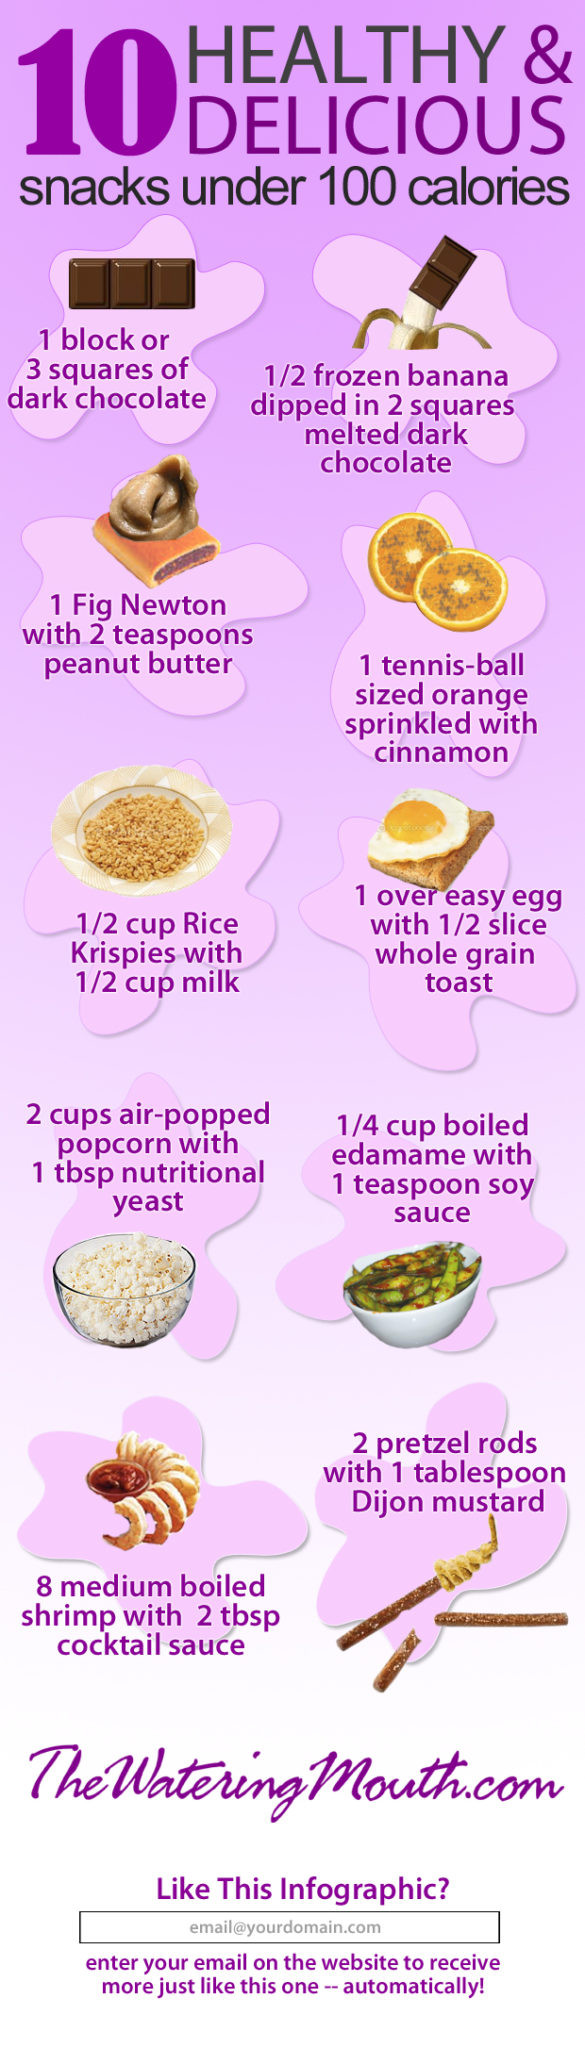 10 Healthy Snacks
 10 Healthy Snacks Under 100 Calories [ infographic] The